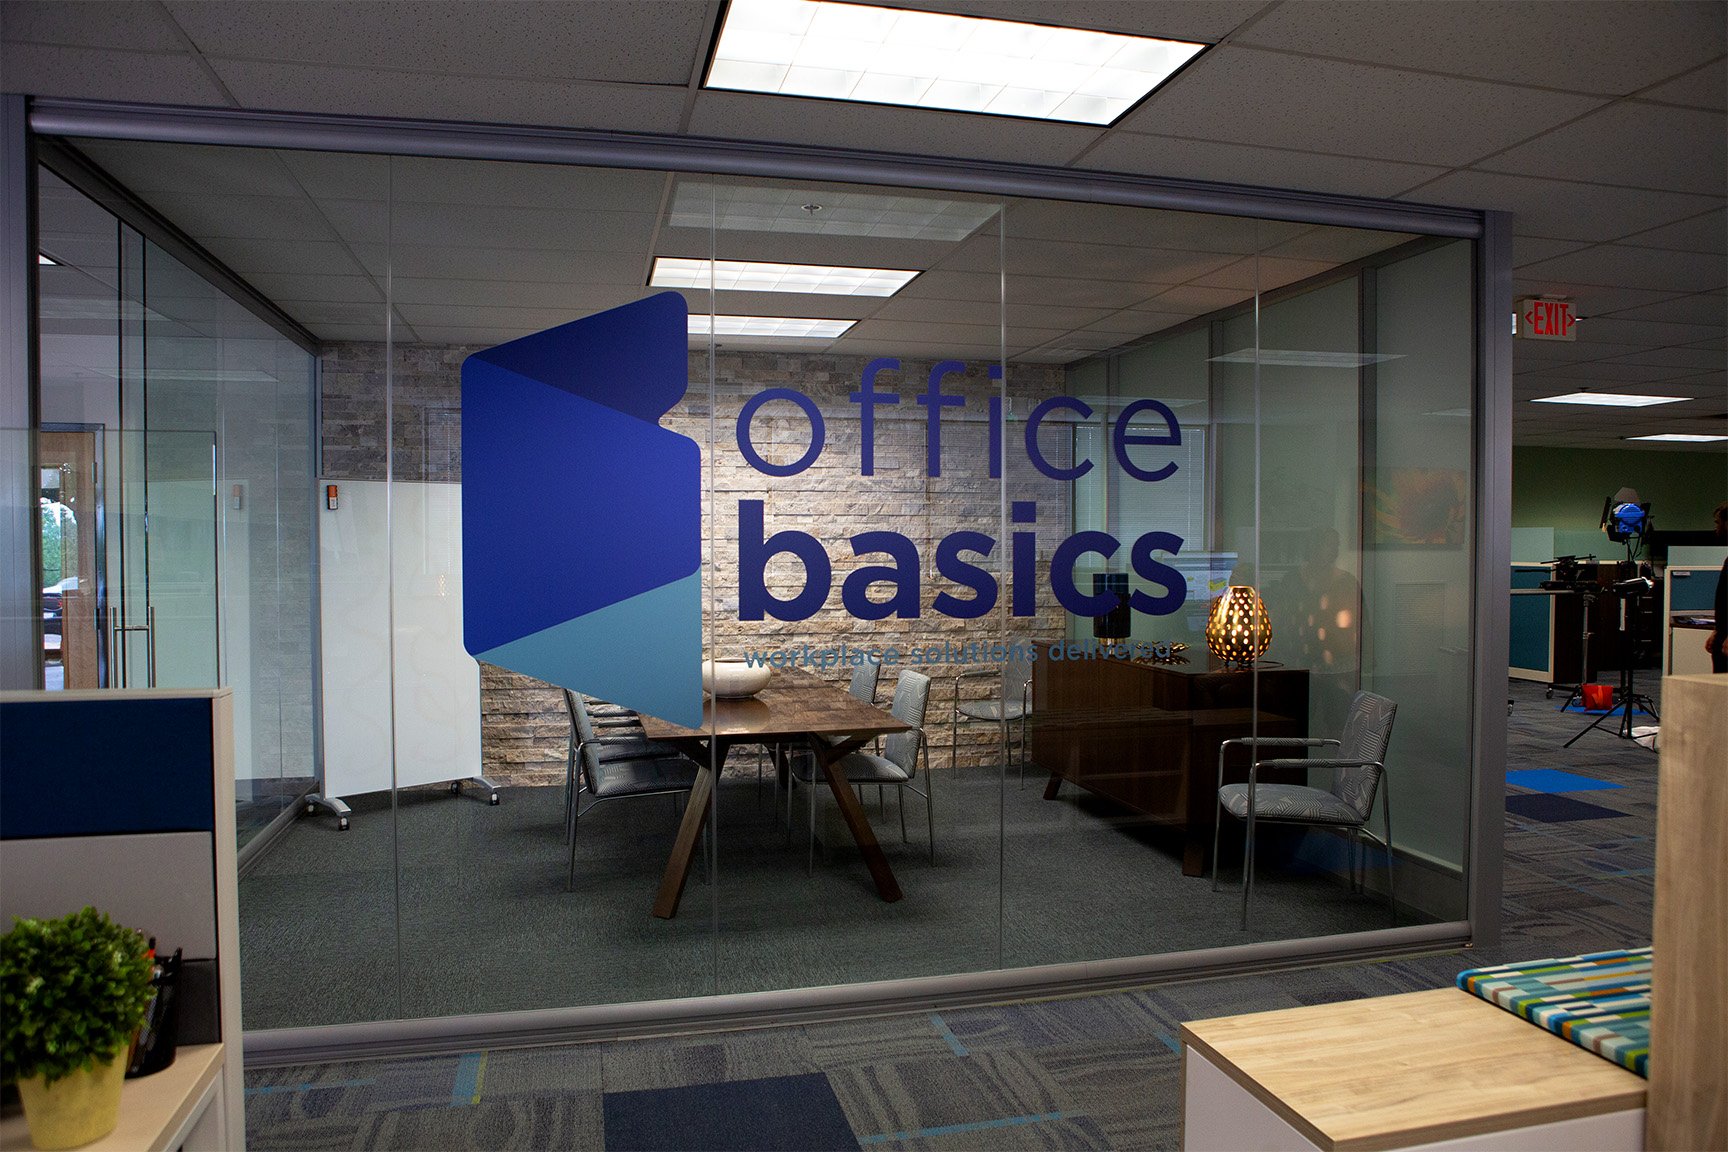 How to Choose a Reliable Office Supplies Store